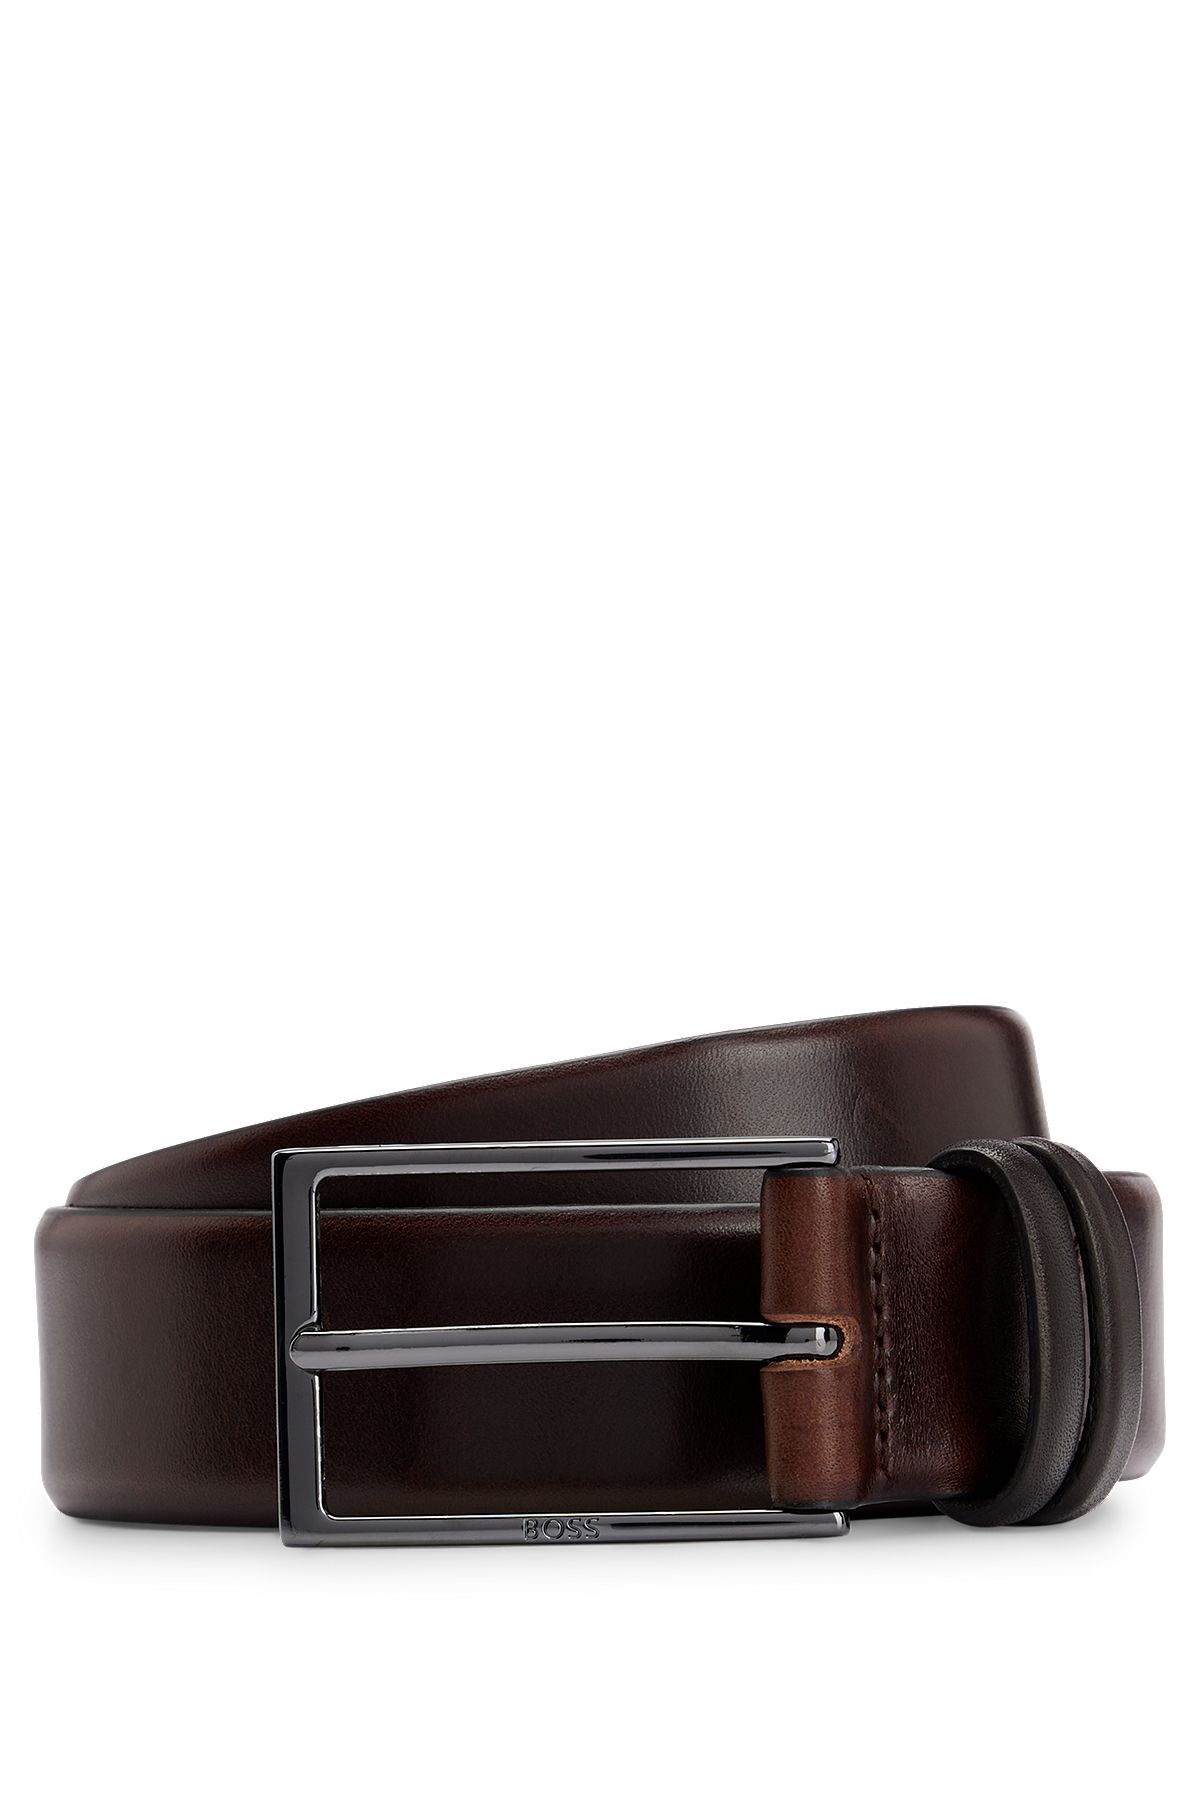 Men's Chino Belt Chocolate Brown 48, Leather | L.L.Bean